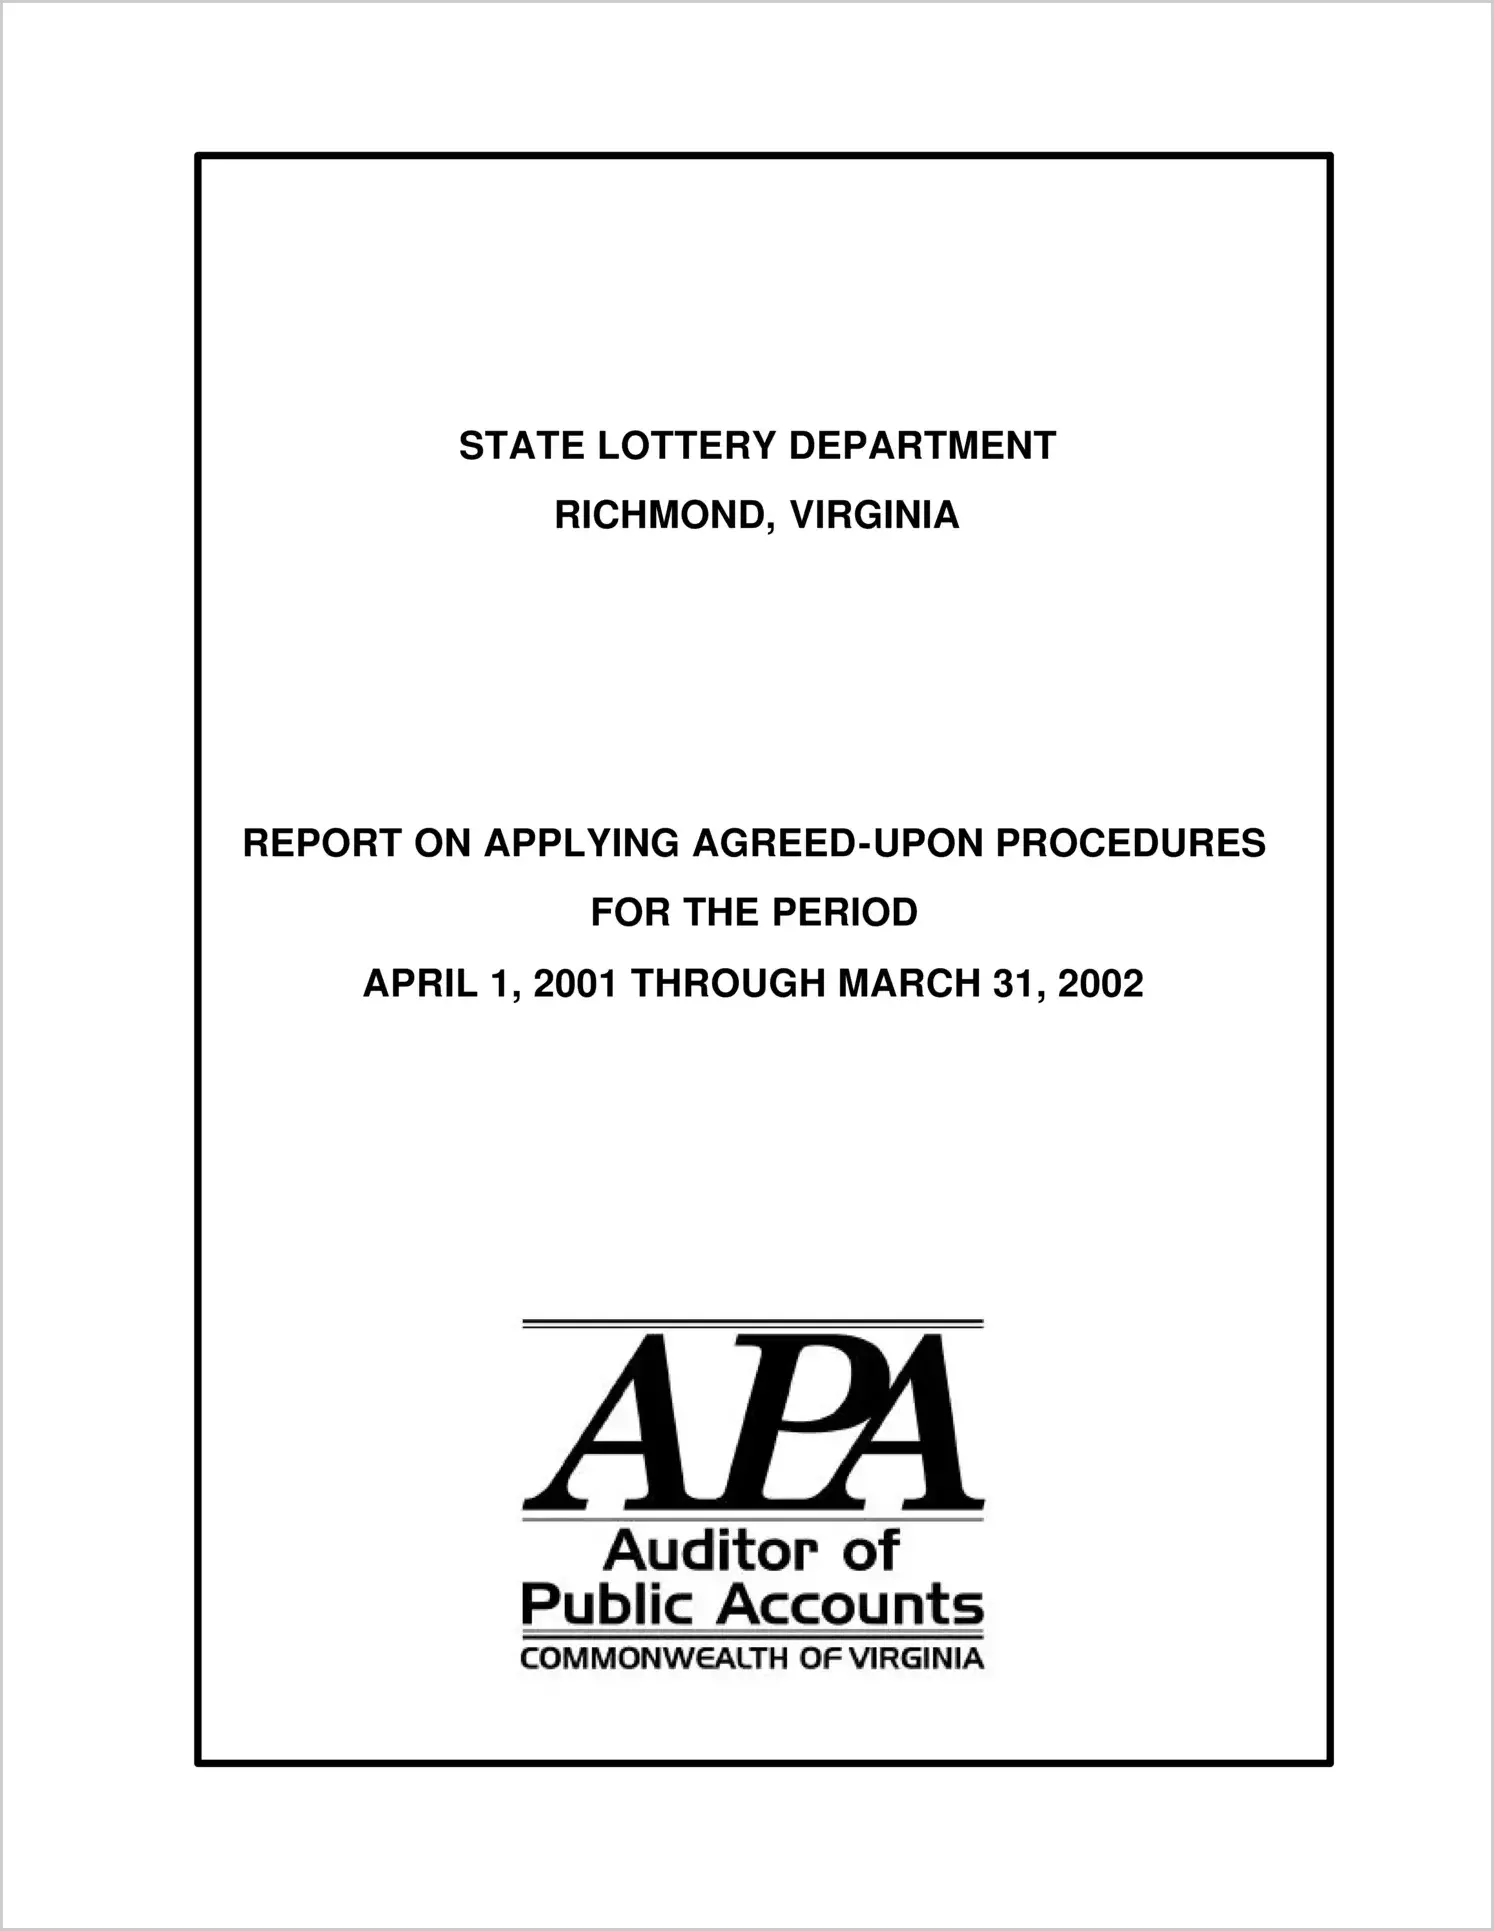 Special ReportState Lottery Department Report on Applying Agreed-Upon Procedures (Big Game)(Report Period: 4/1/2001 - 3/31/2002)